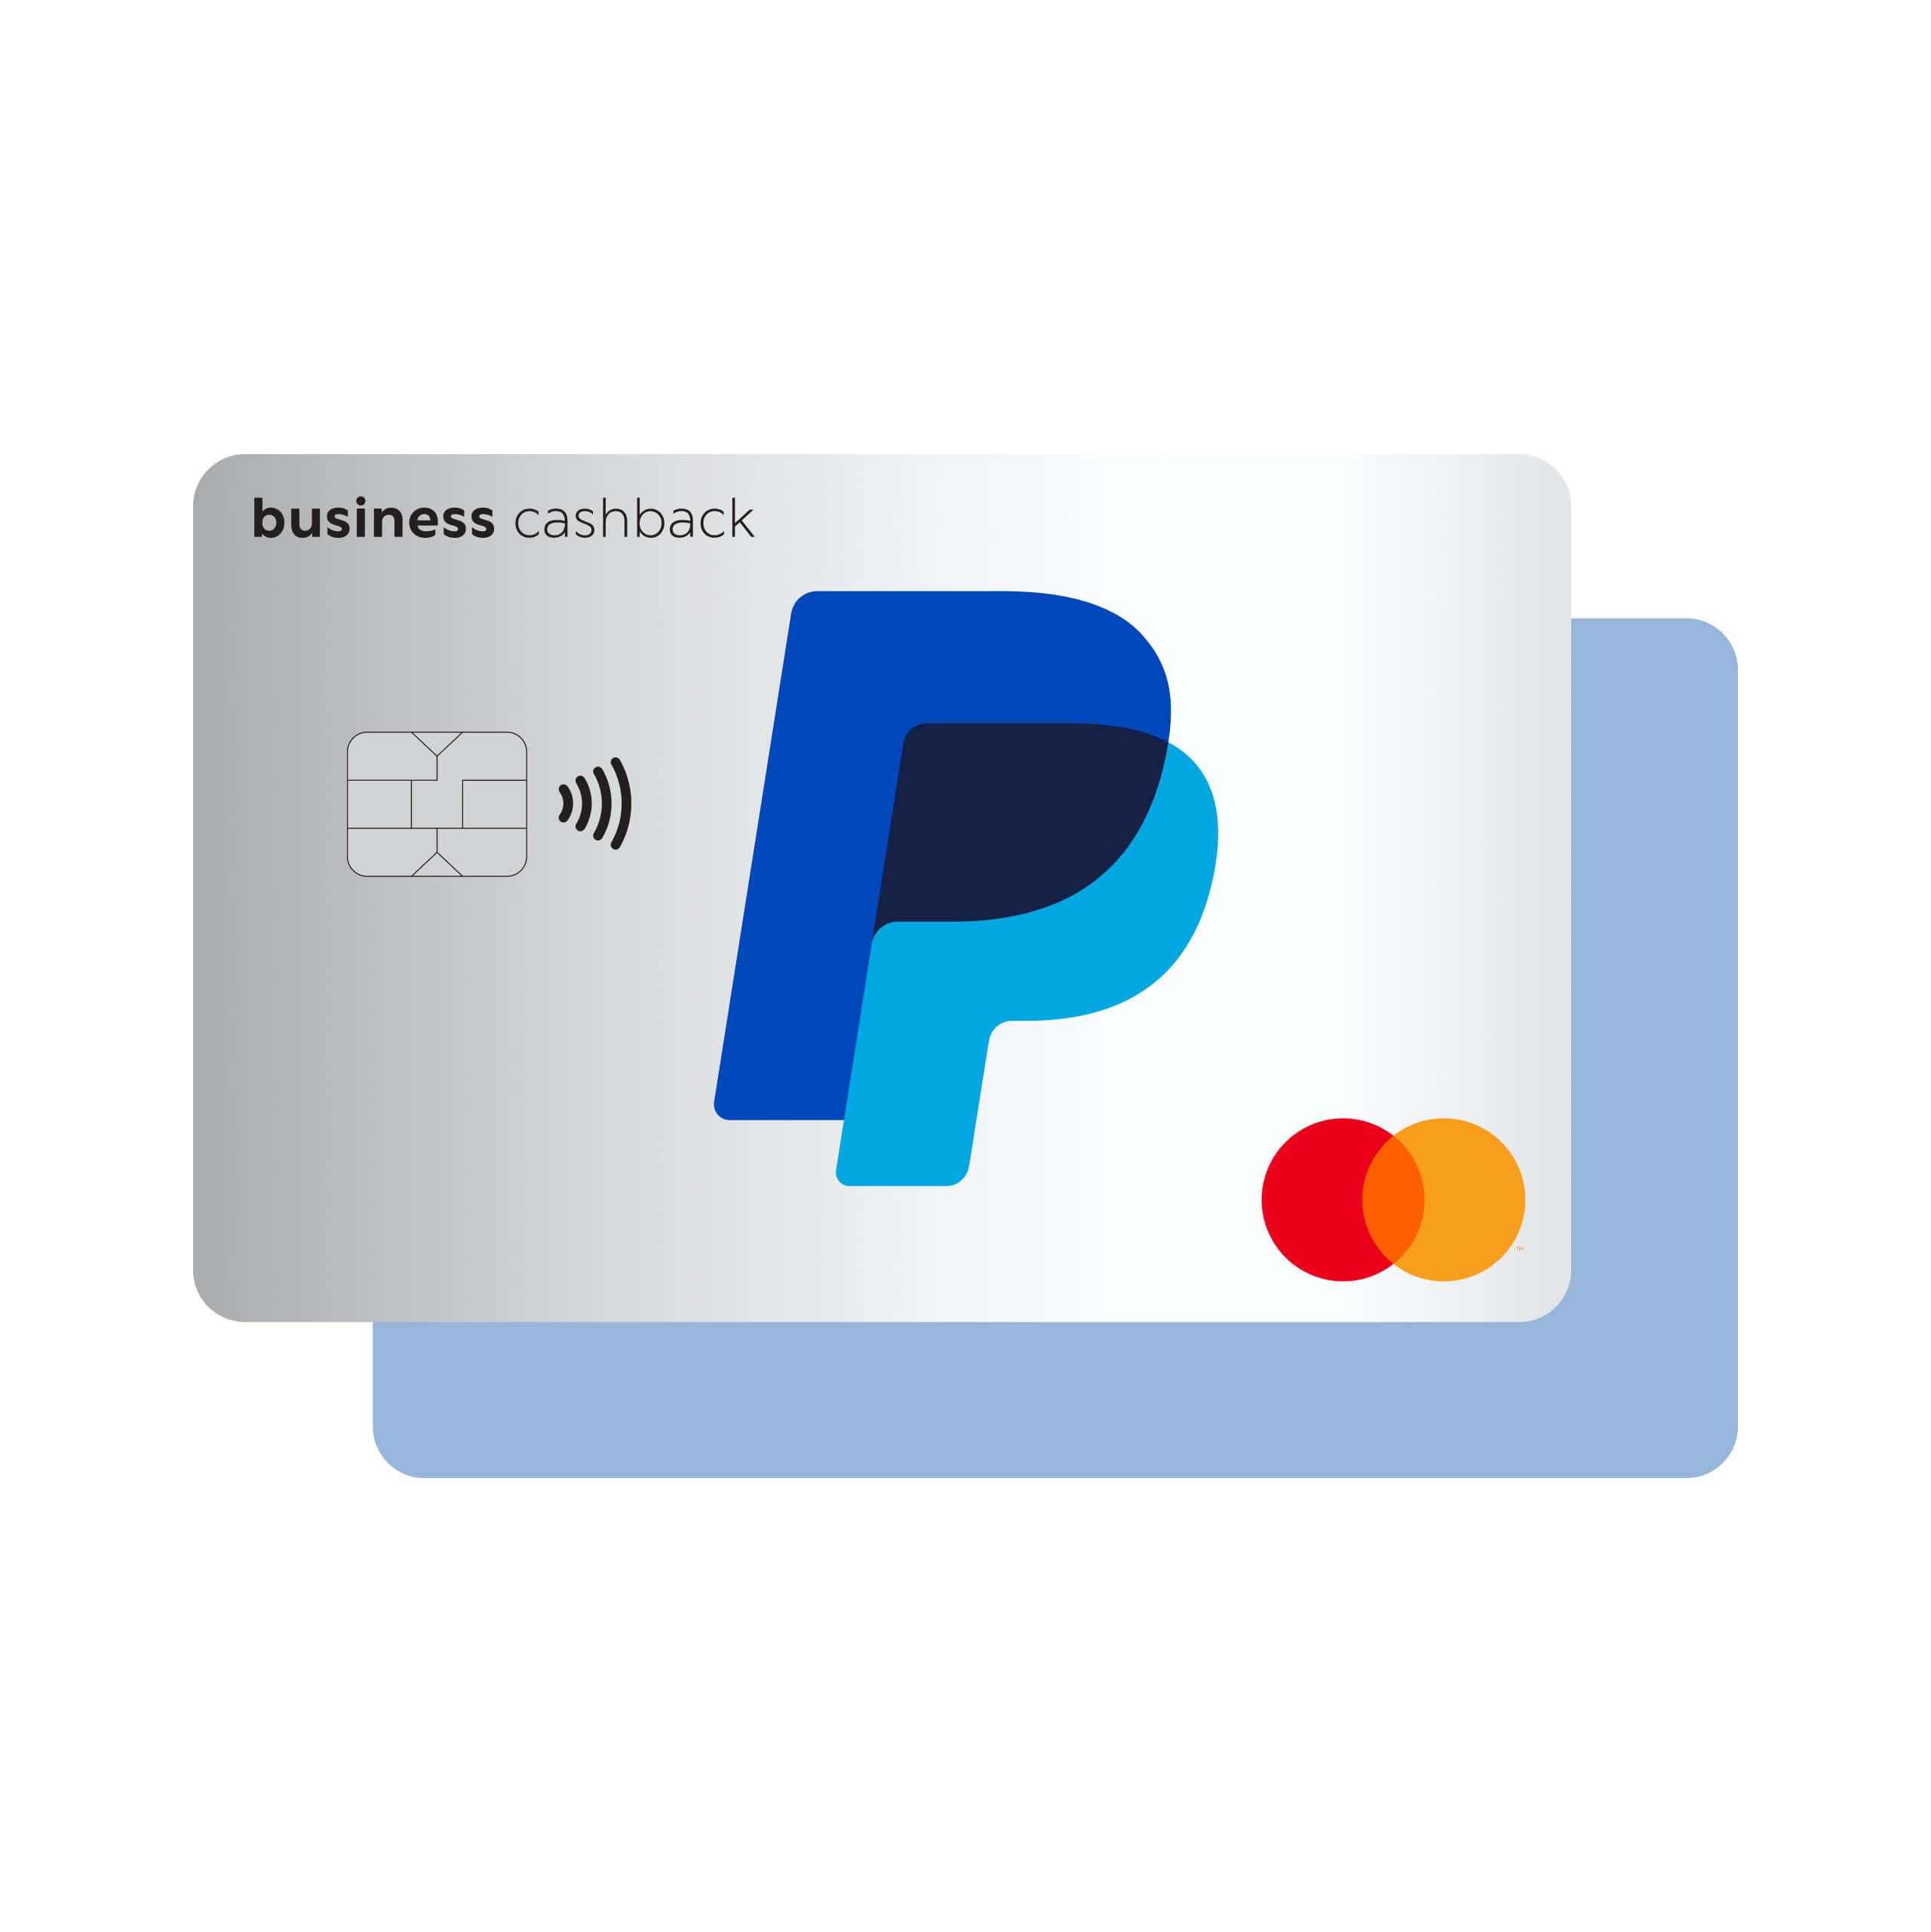 What bank accounts and debit cards are eligible for Instant Transfer? | PayPal RS